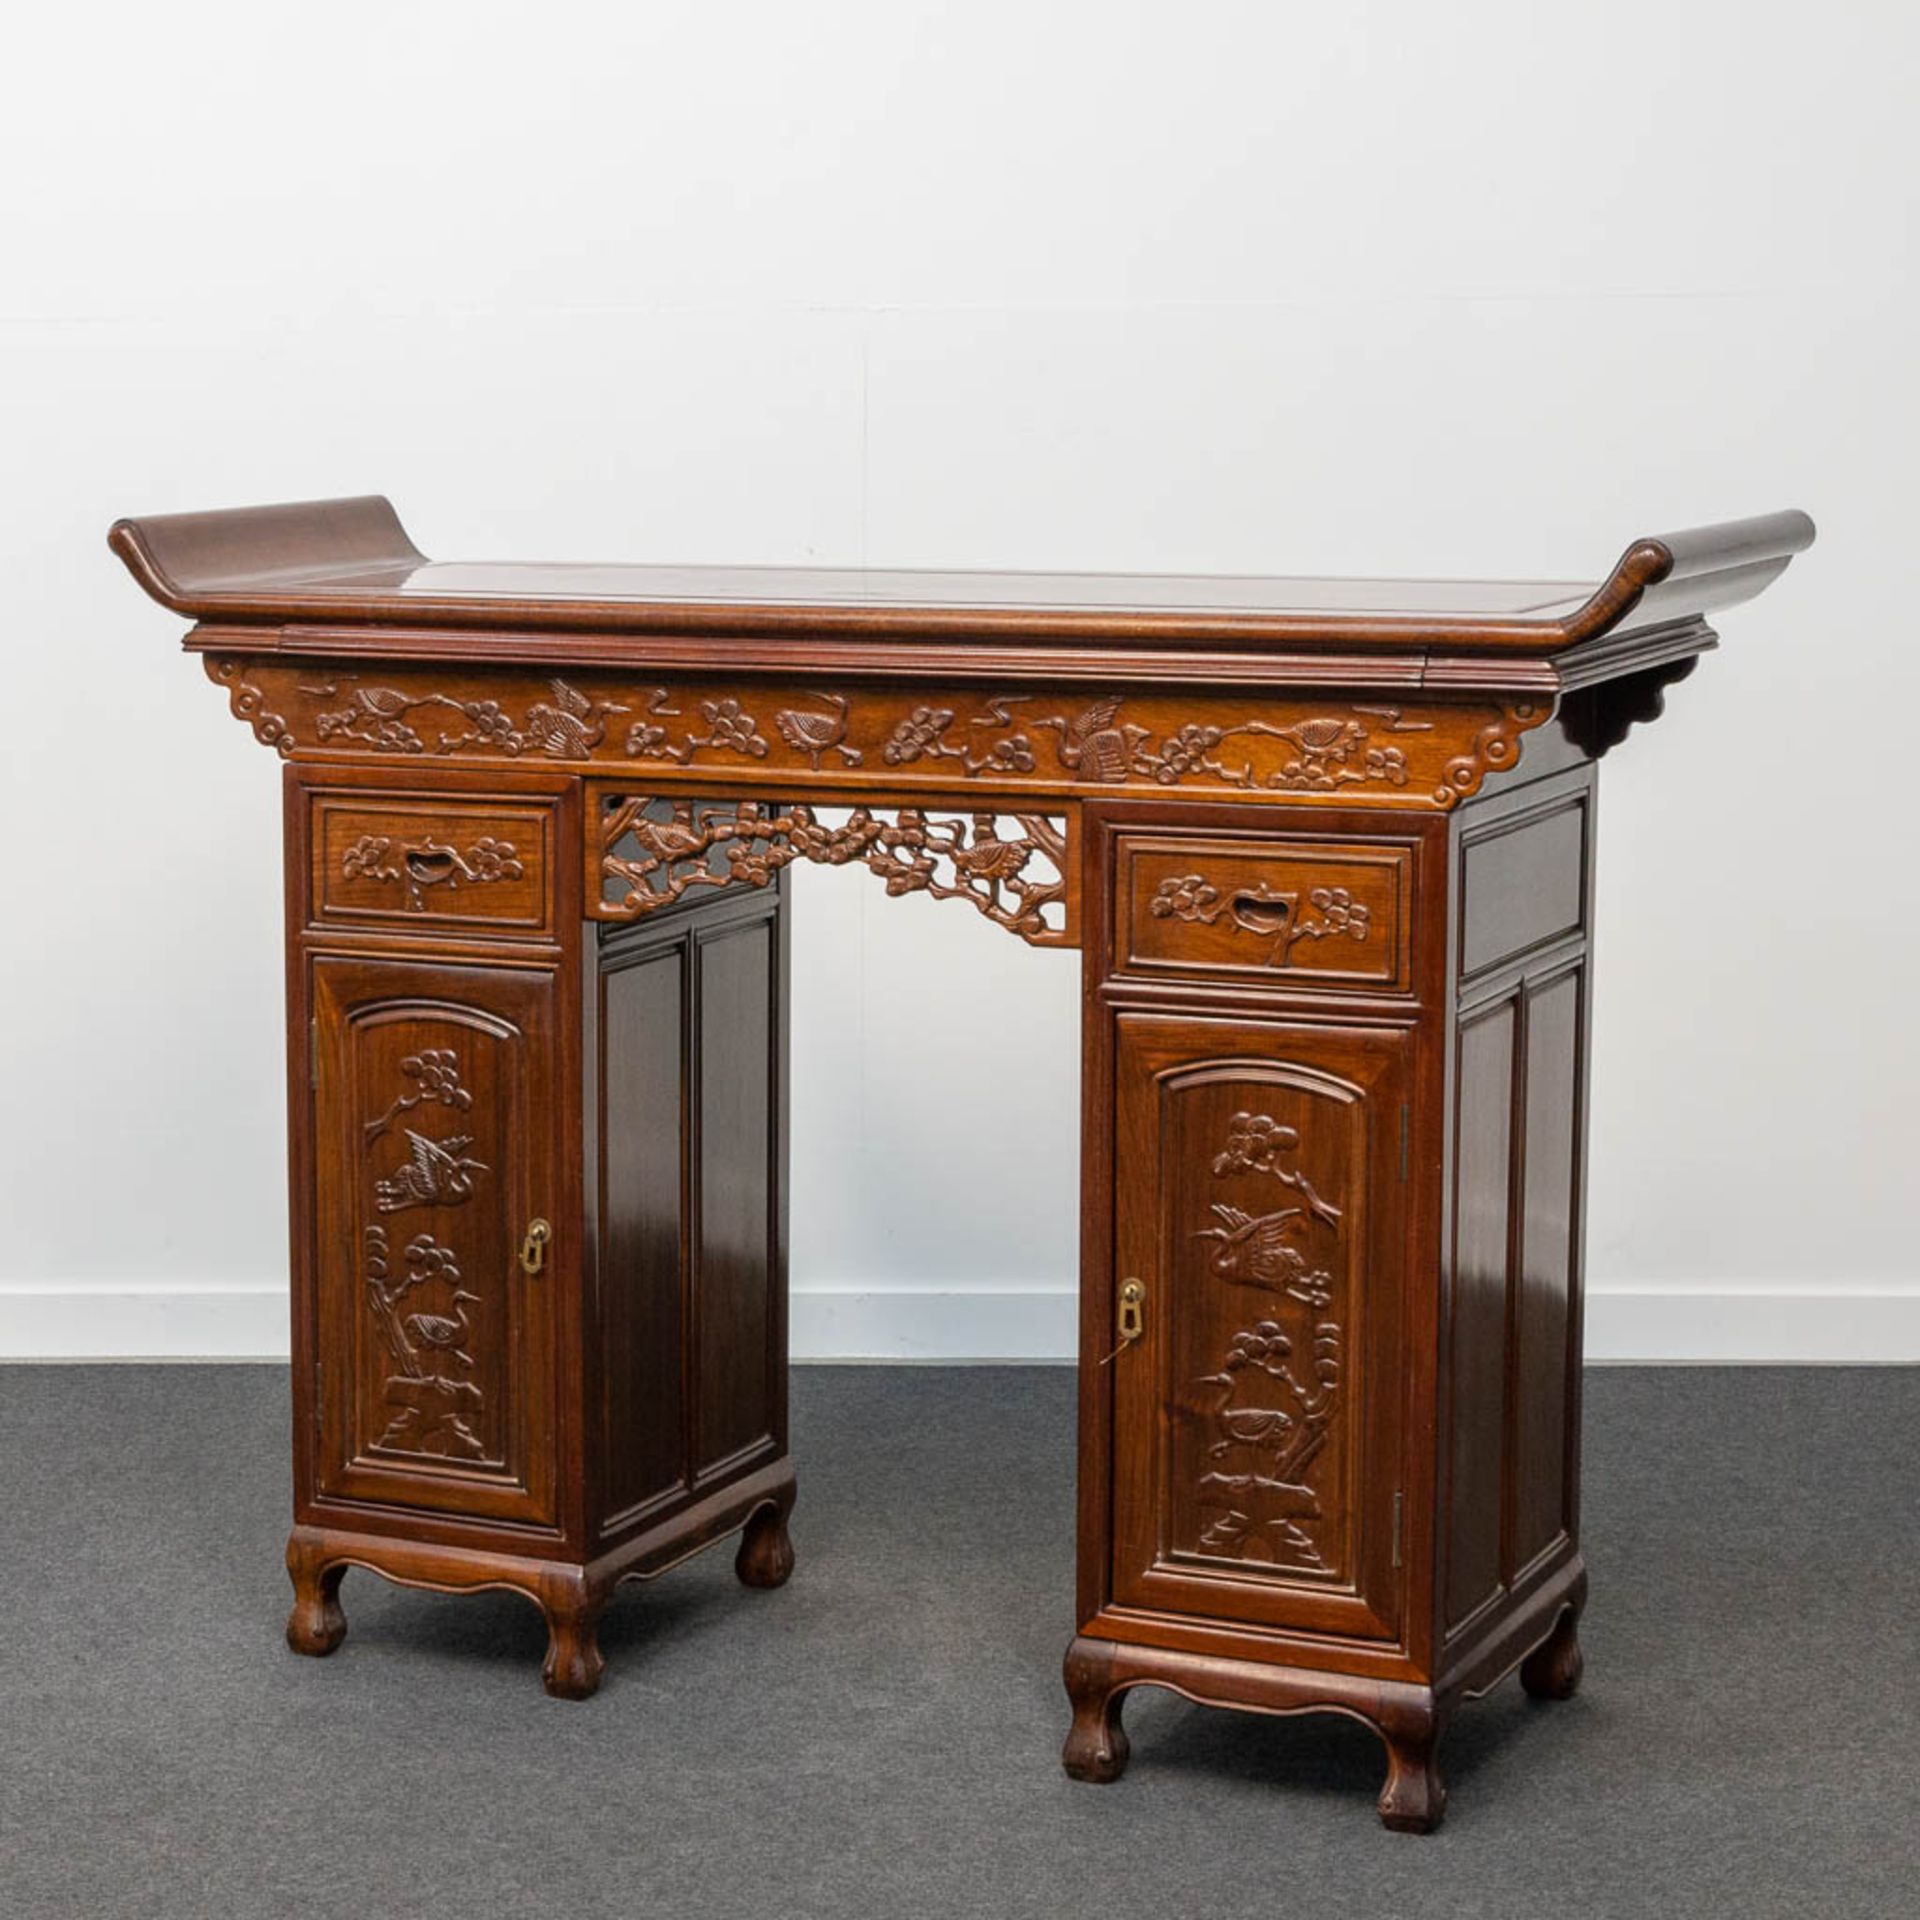 A Chinese hardwood Scroll Desk - Image 14 of 23